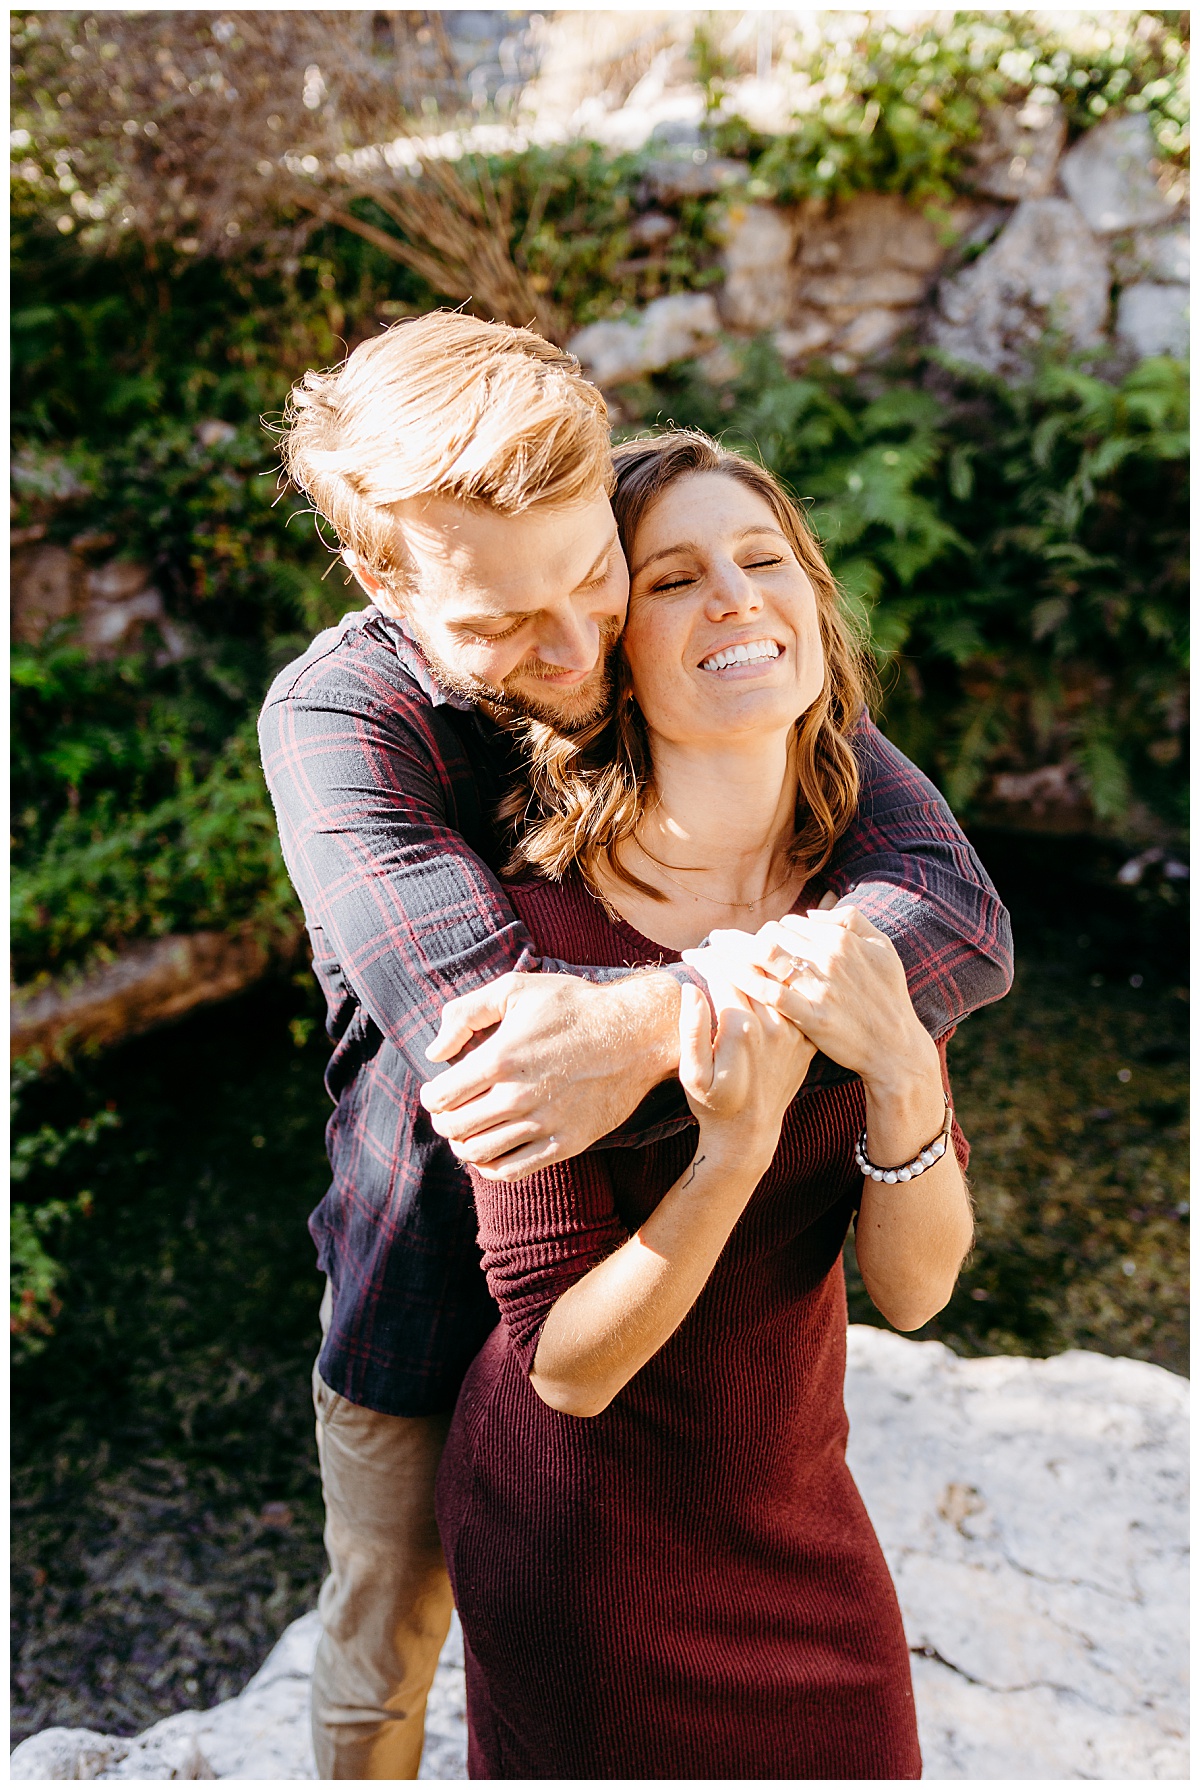 Man hugs woman from behind by Austin wedding photographer